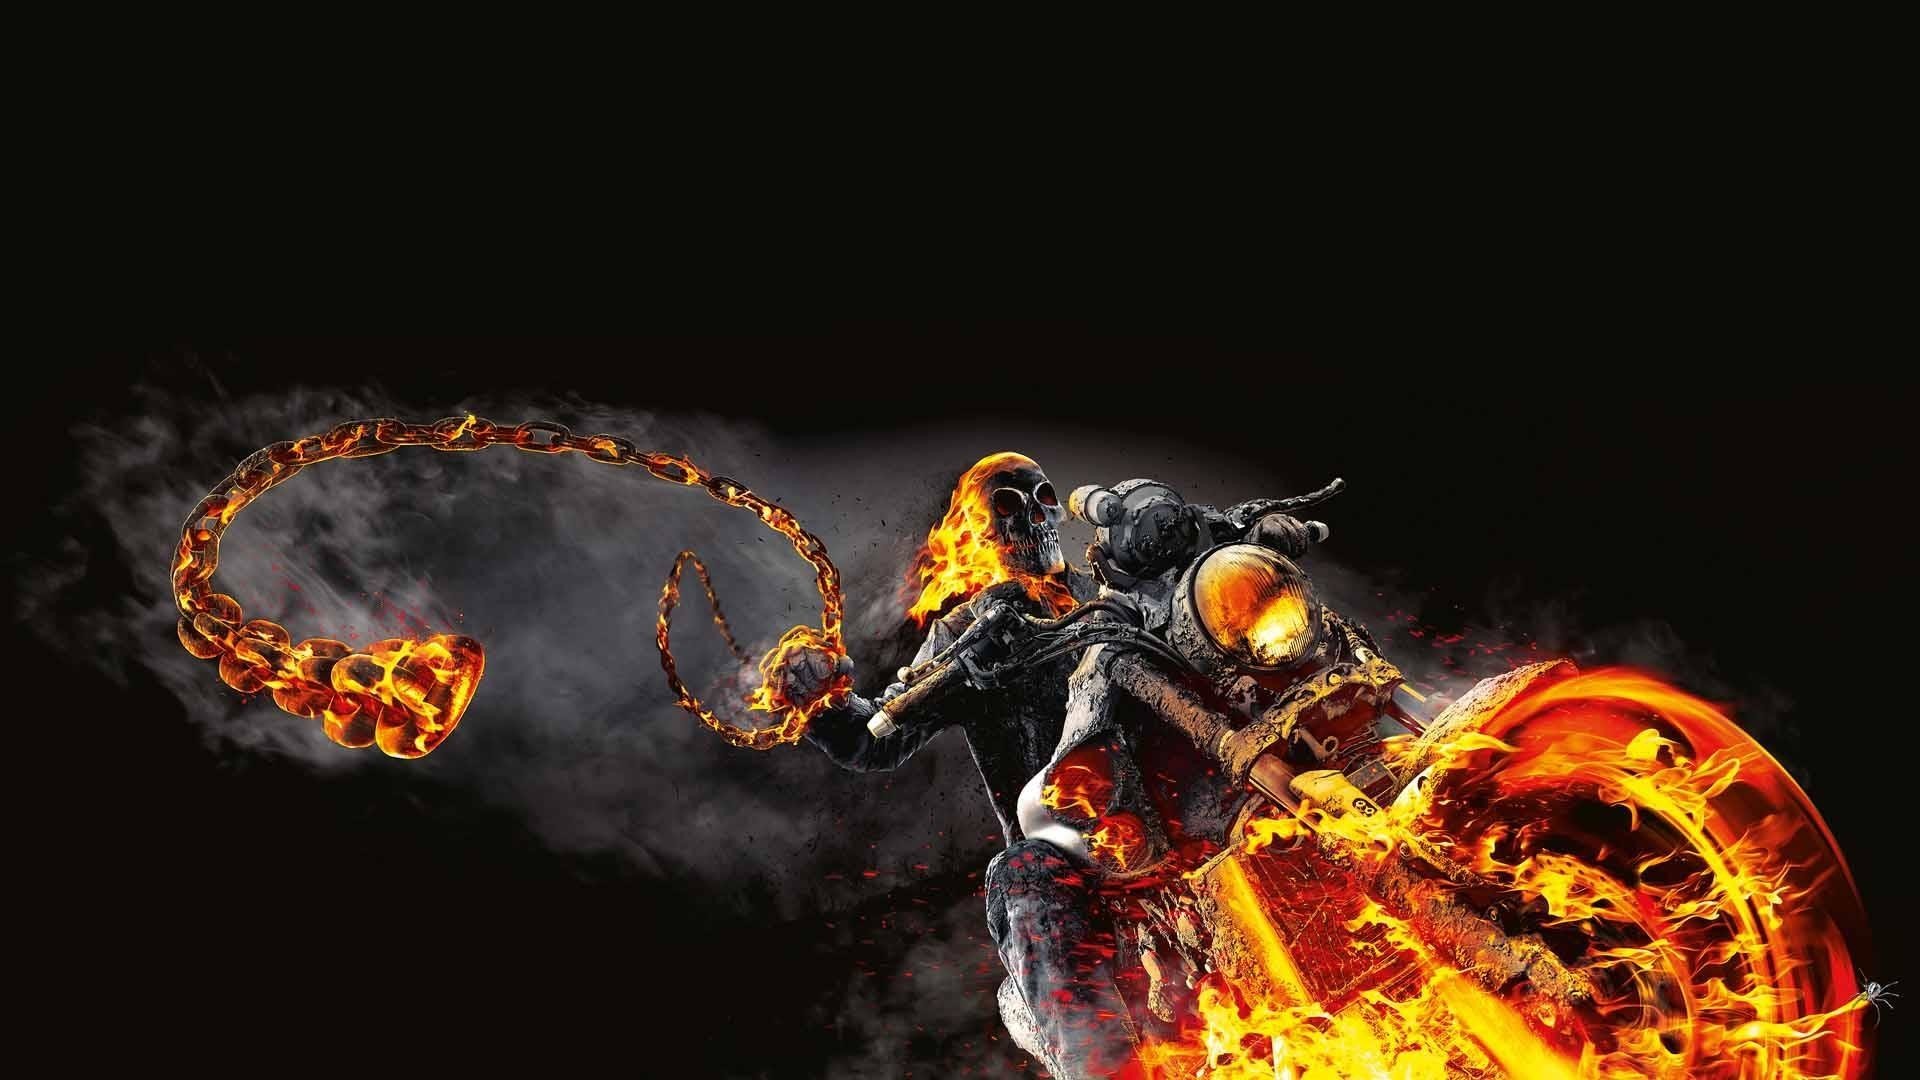 1920x1080 141 Ghost Rider HD Wallpapers | Backgrounds - Wallpaper Abyss Ghost Rider  Wallpapers - Wallpaper Cave